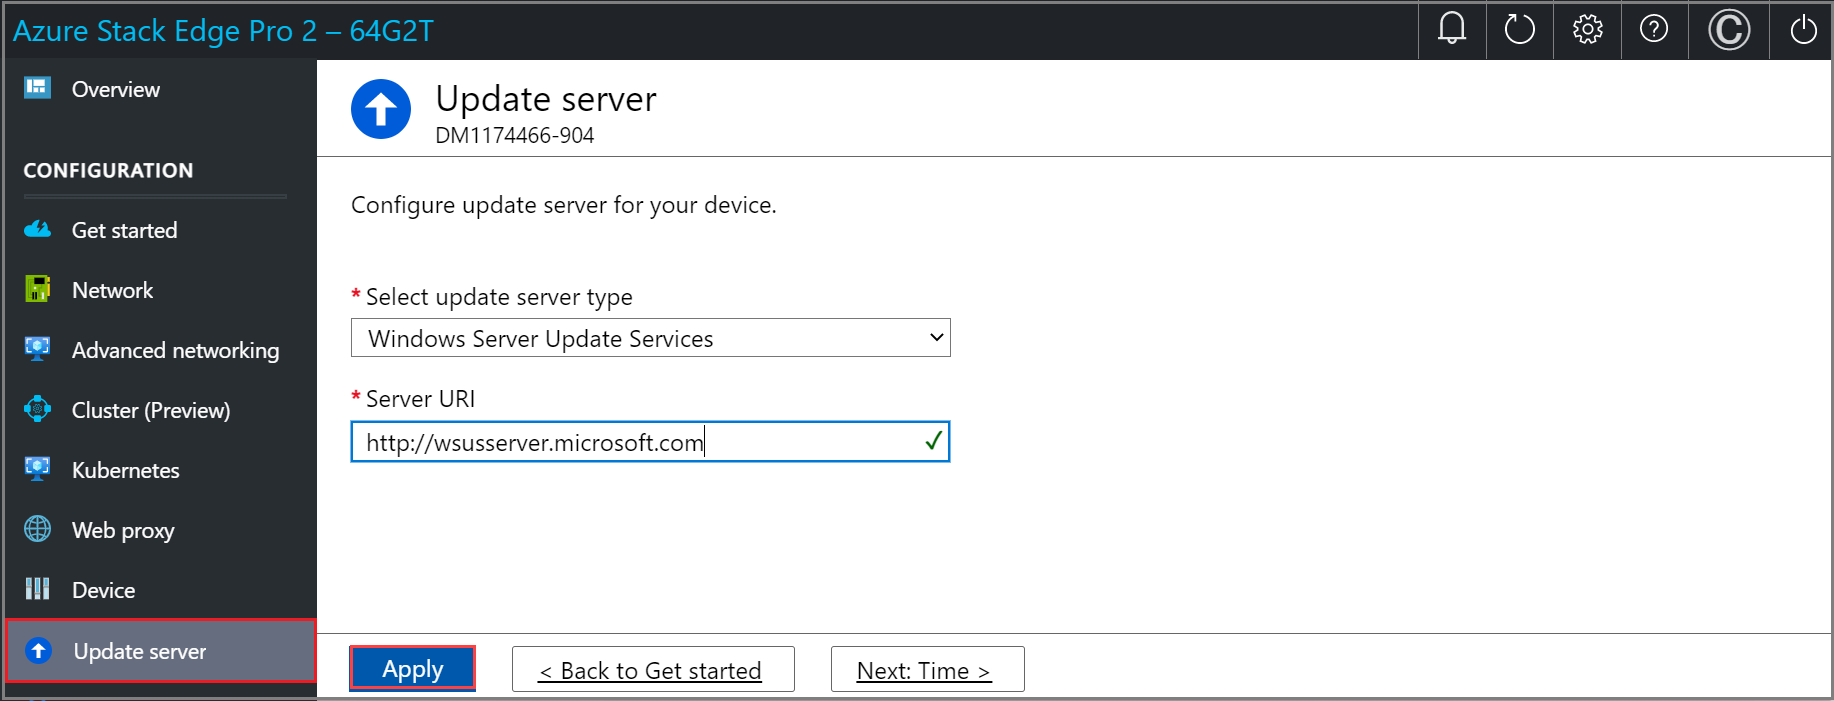 Screenshot of the Update server page with Windows Server Update Services configured in the local web UI of an Azure Stack Edge device. The Apply button is highlighted.